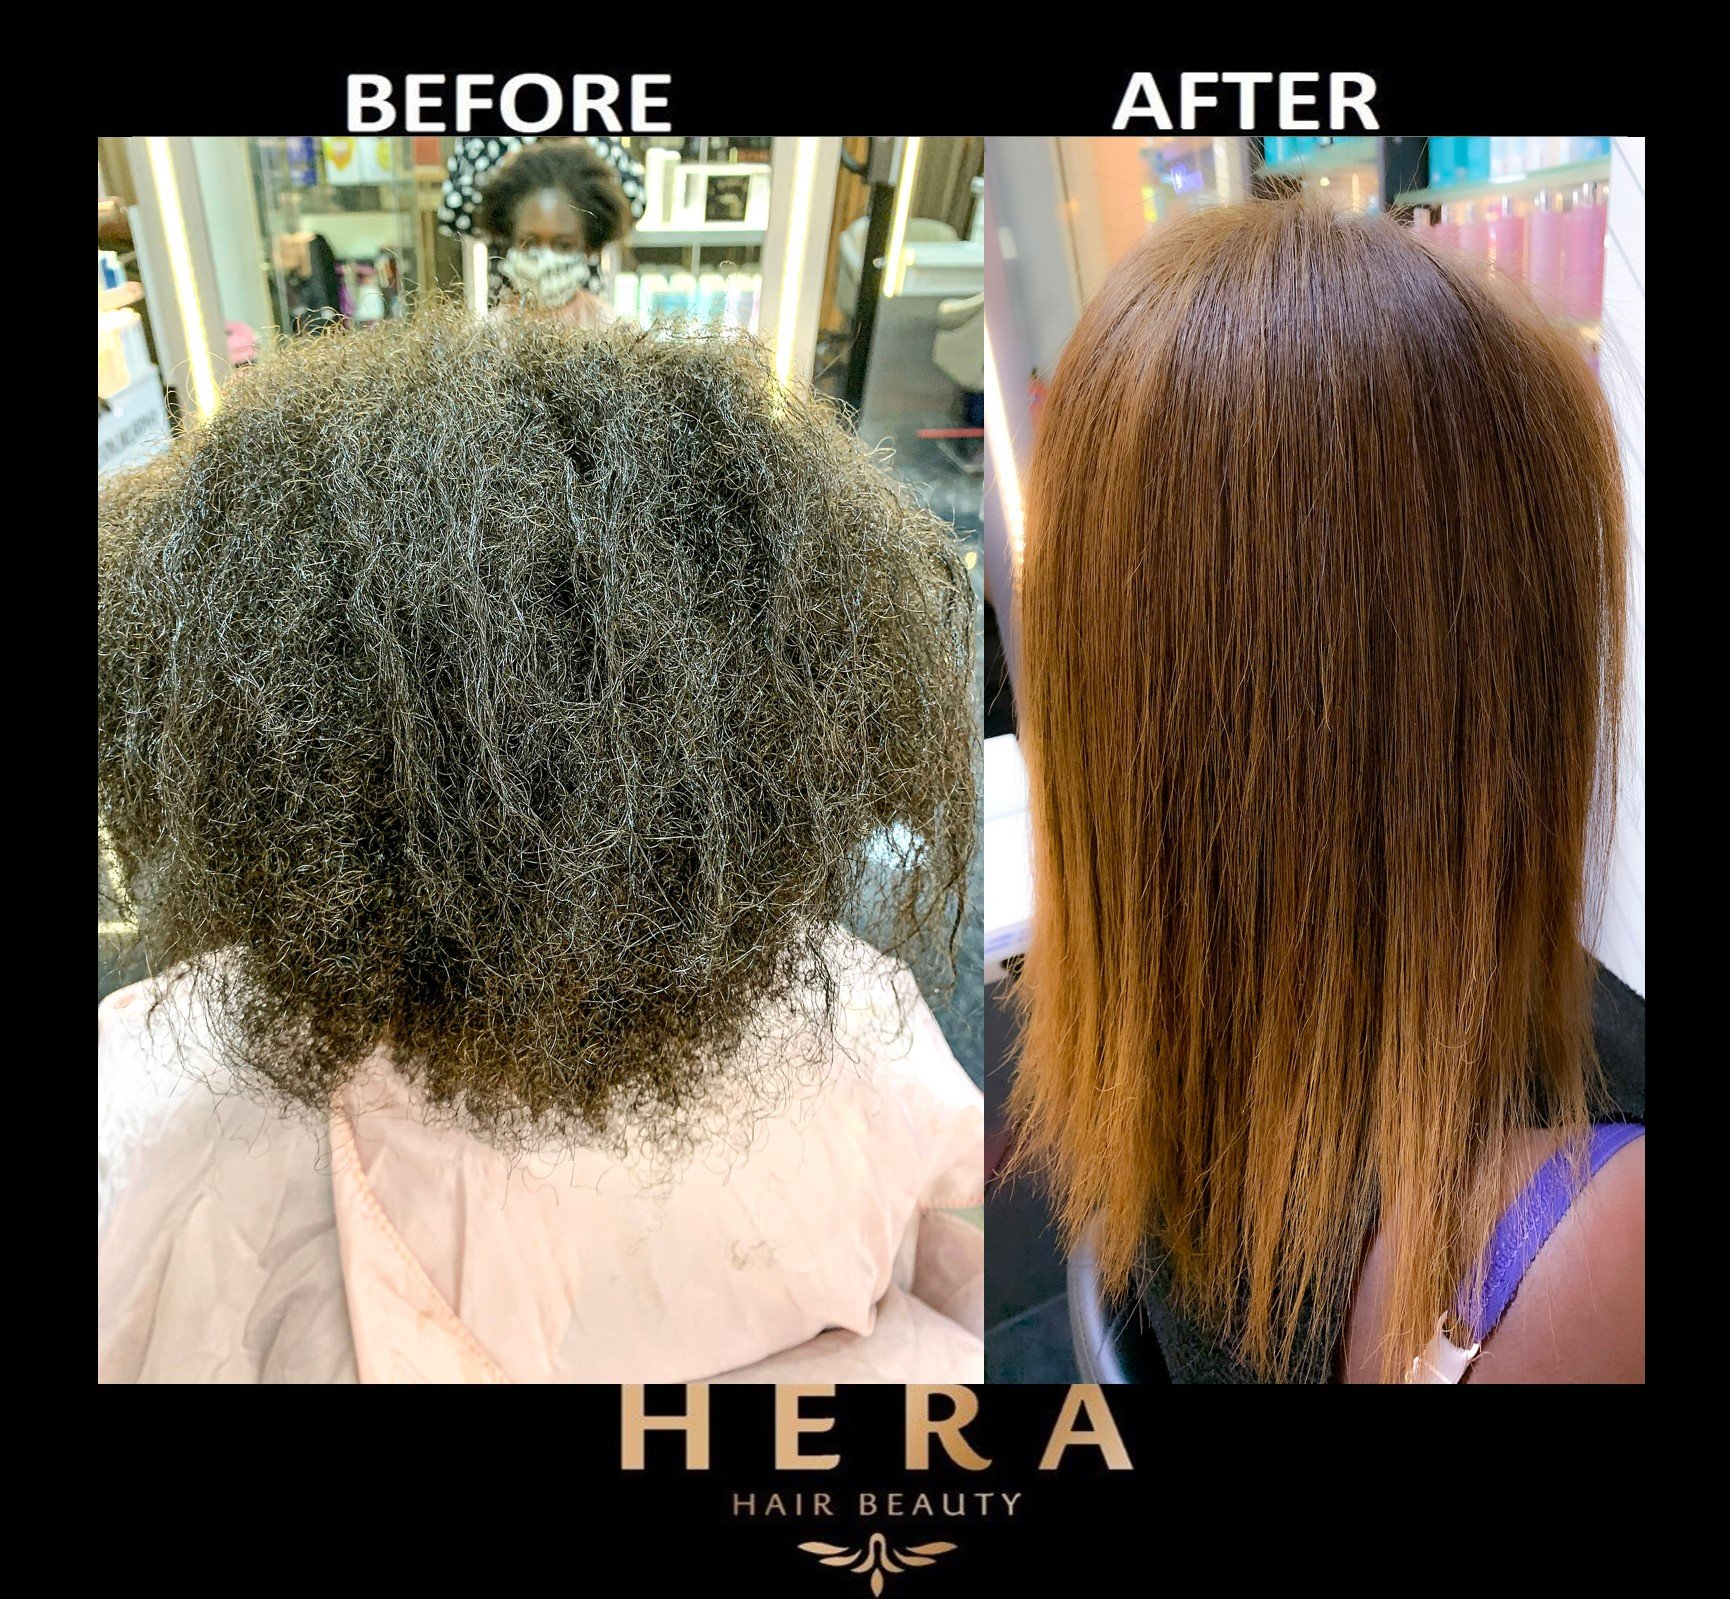 Do You Know Why Your Hair Turns Orange After Treatment? | Hera Hair Beauty